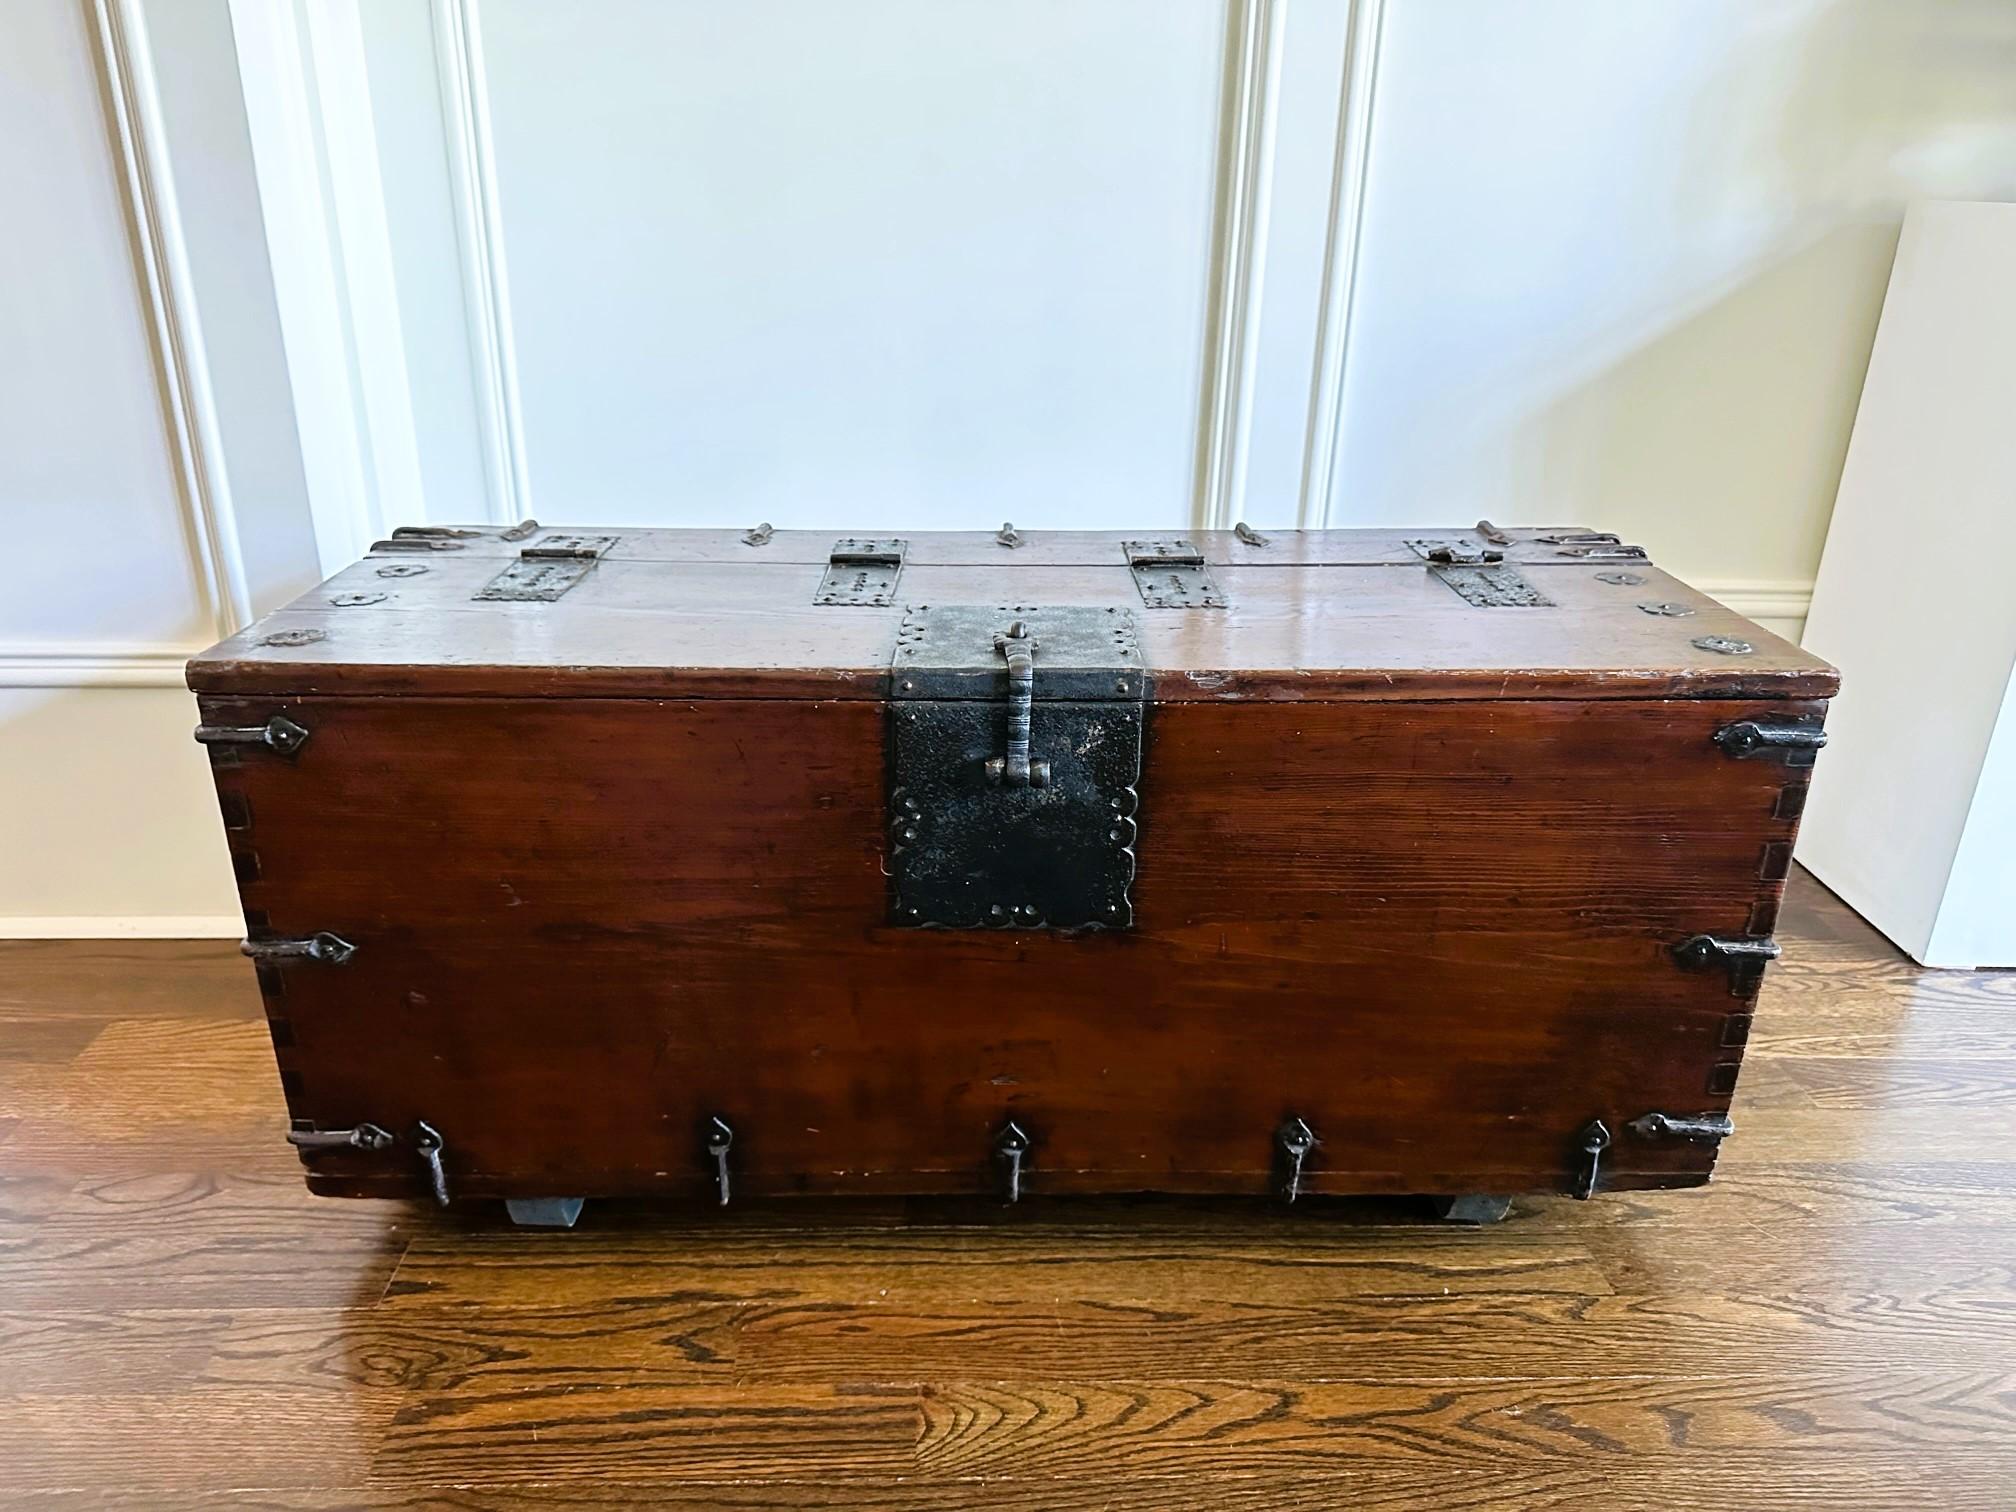 A large Korean top-lid chest on block feet circa 19th century of Joseon Dynasty. Known as coin chest (Ton-Kwe in Korean), this type of chest was originally used for storing money. The larger versions were probably used to store other valuables. They